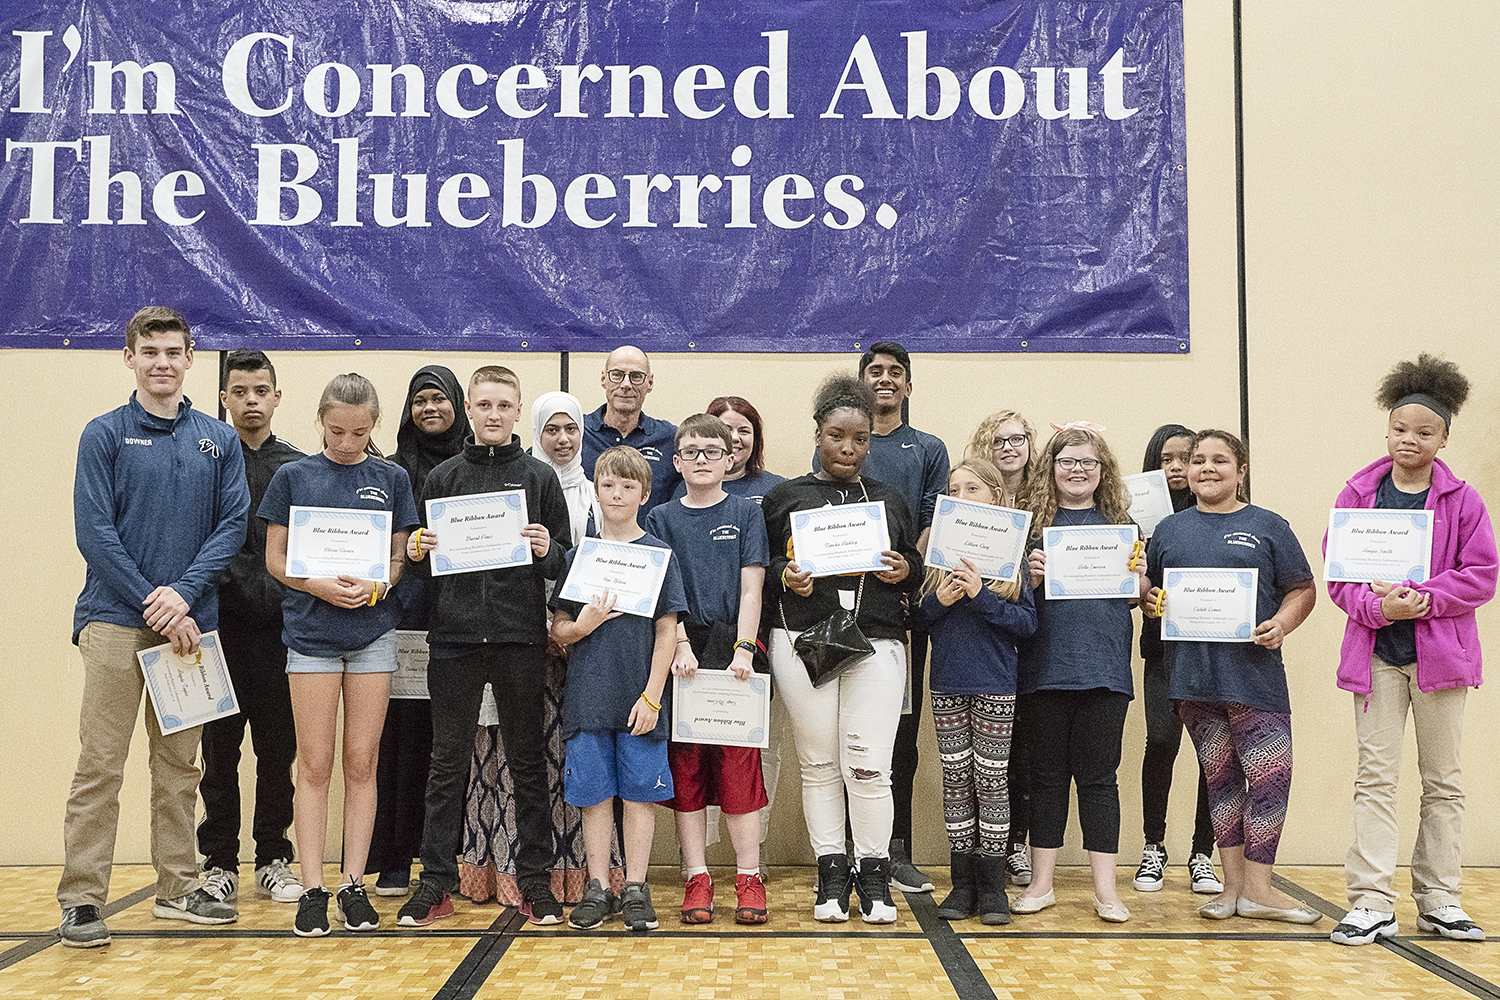 Flint, MI - Friday, May 4, 2018: Blueberry Ambassador Blue Ribbon Award recipients stand on stage for a photograph during the 5th Annual Blueberry Ambassador Awards Party at the Riverfront Banquet Center downtown.